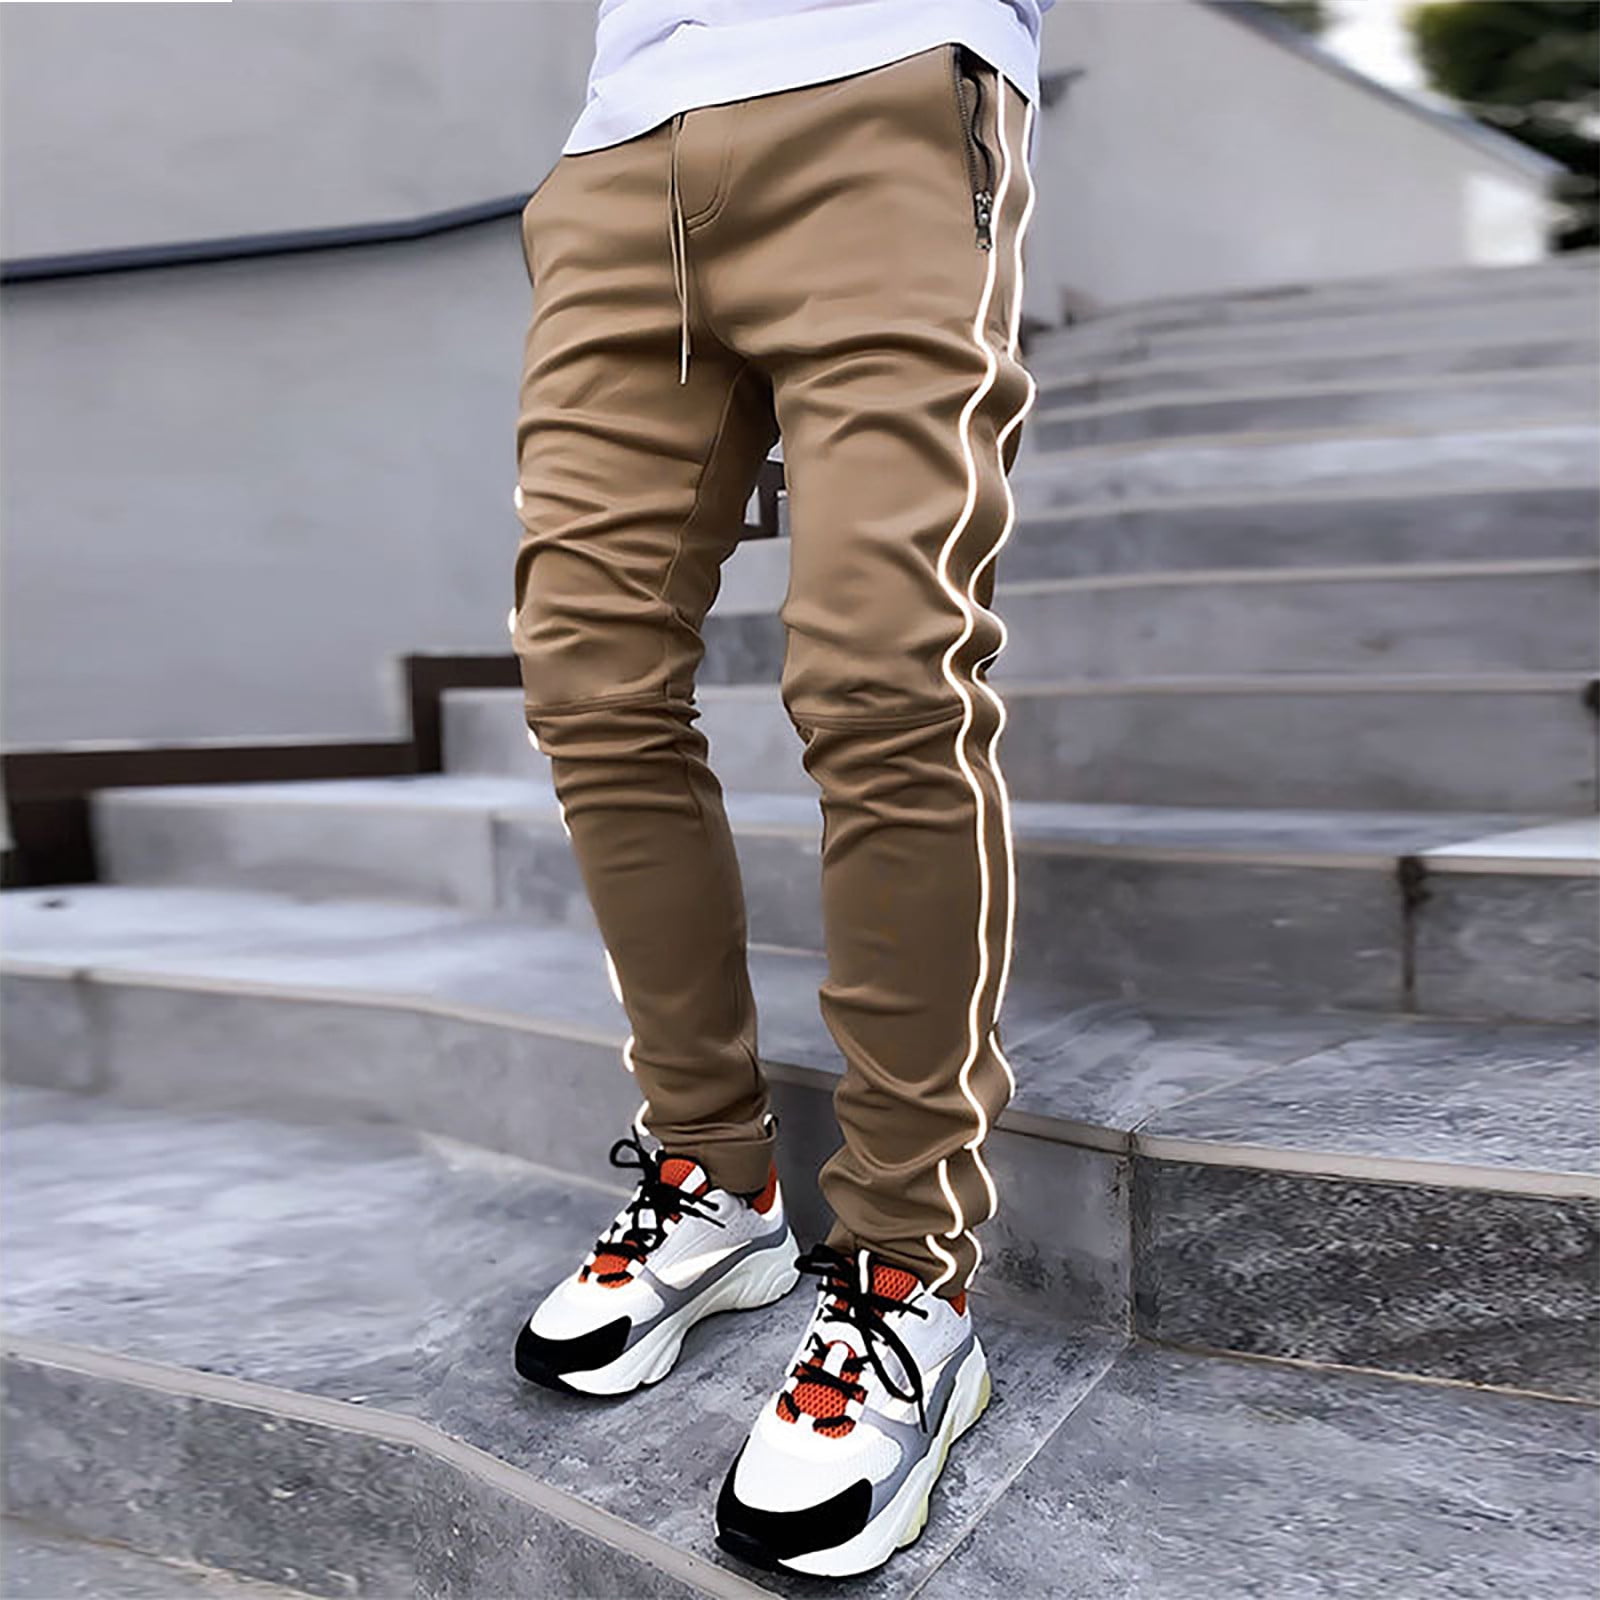 Cargo Pants for Men Relaxed Fit with Pockets Baggy Big and Tall Cargo Pants  Lightweight Rip-Stop Casual Cargo Pants